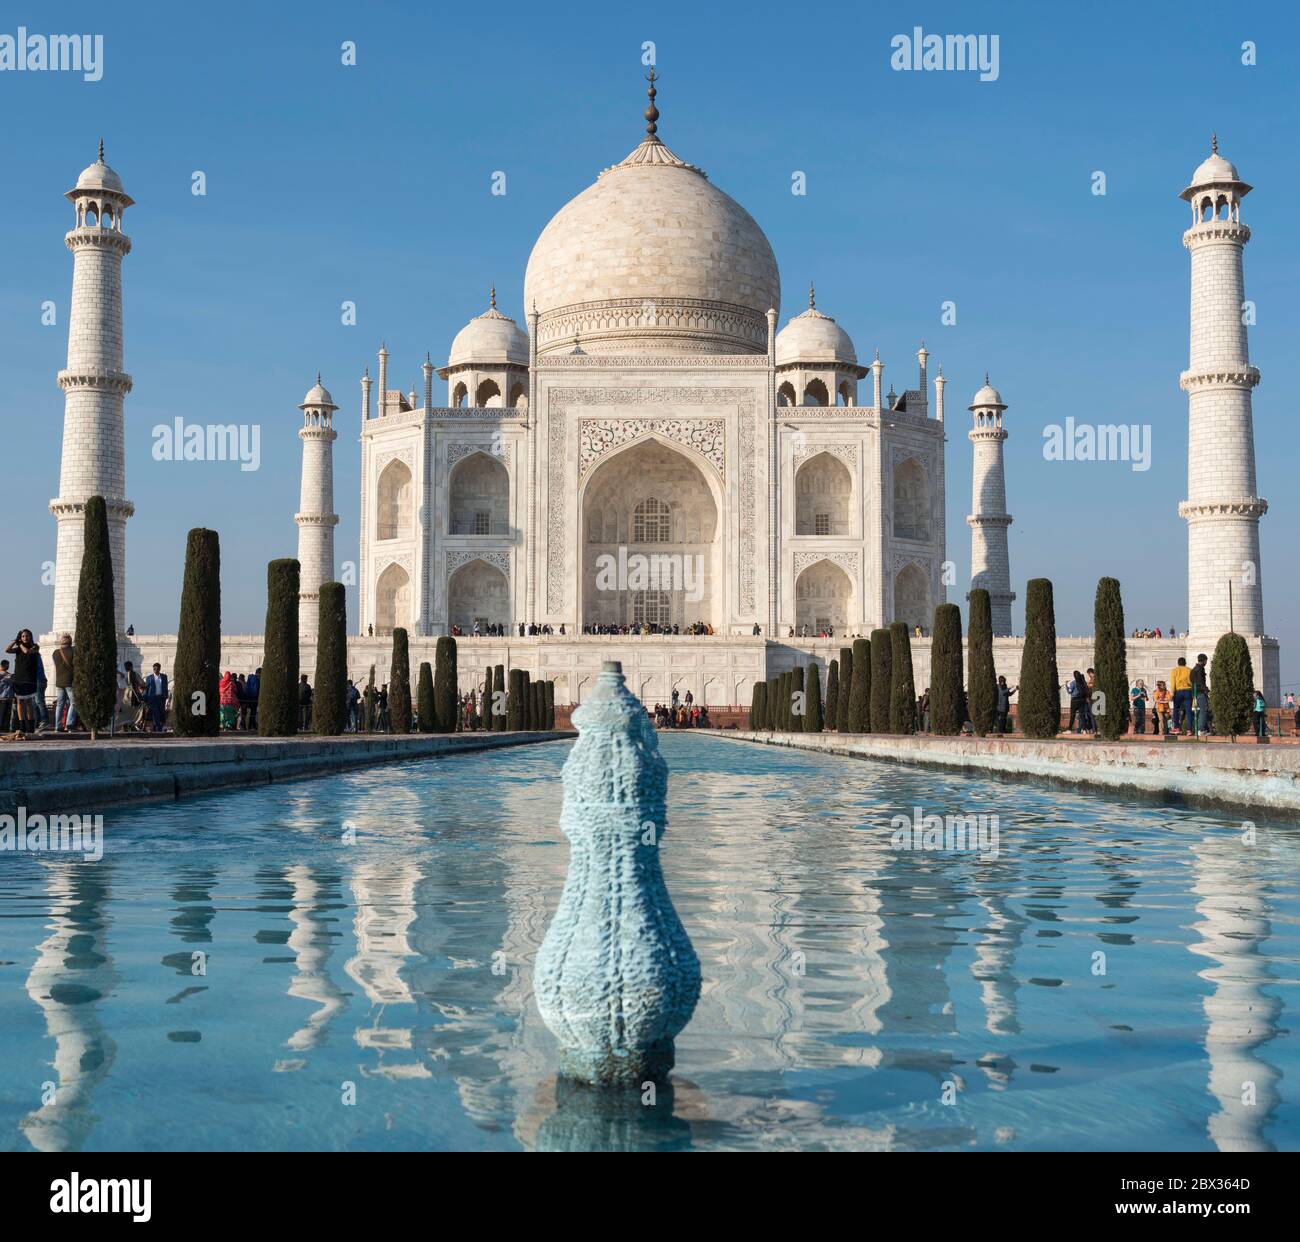 Low angle view of reflecting pool and Taj Mahal in Agra, India Stock Photo